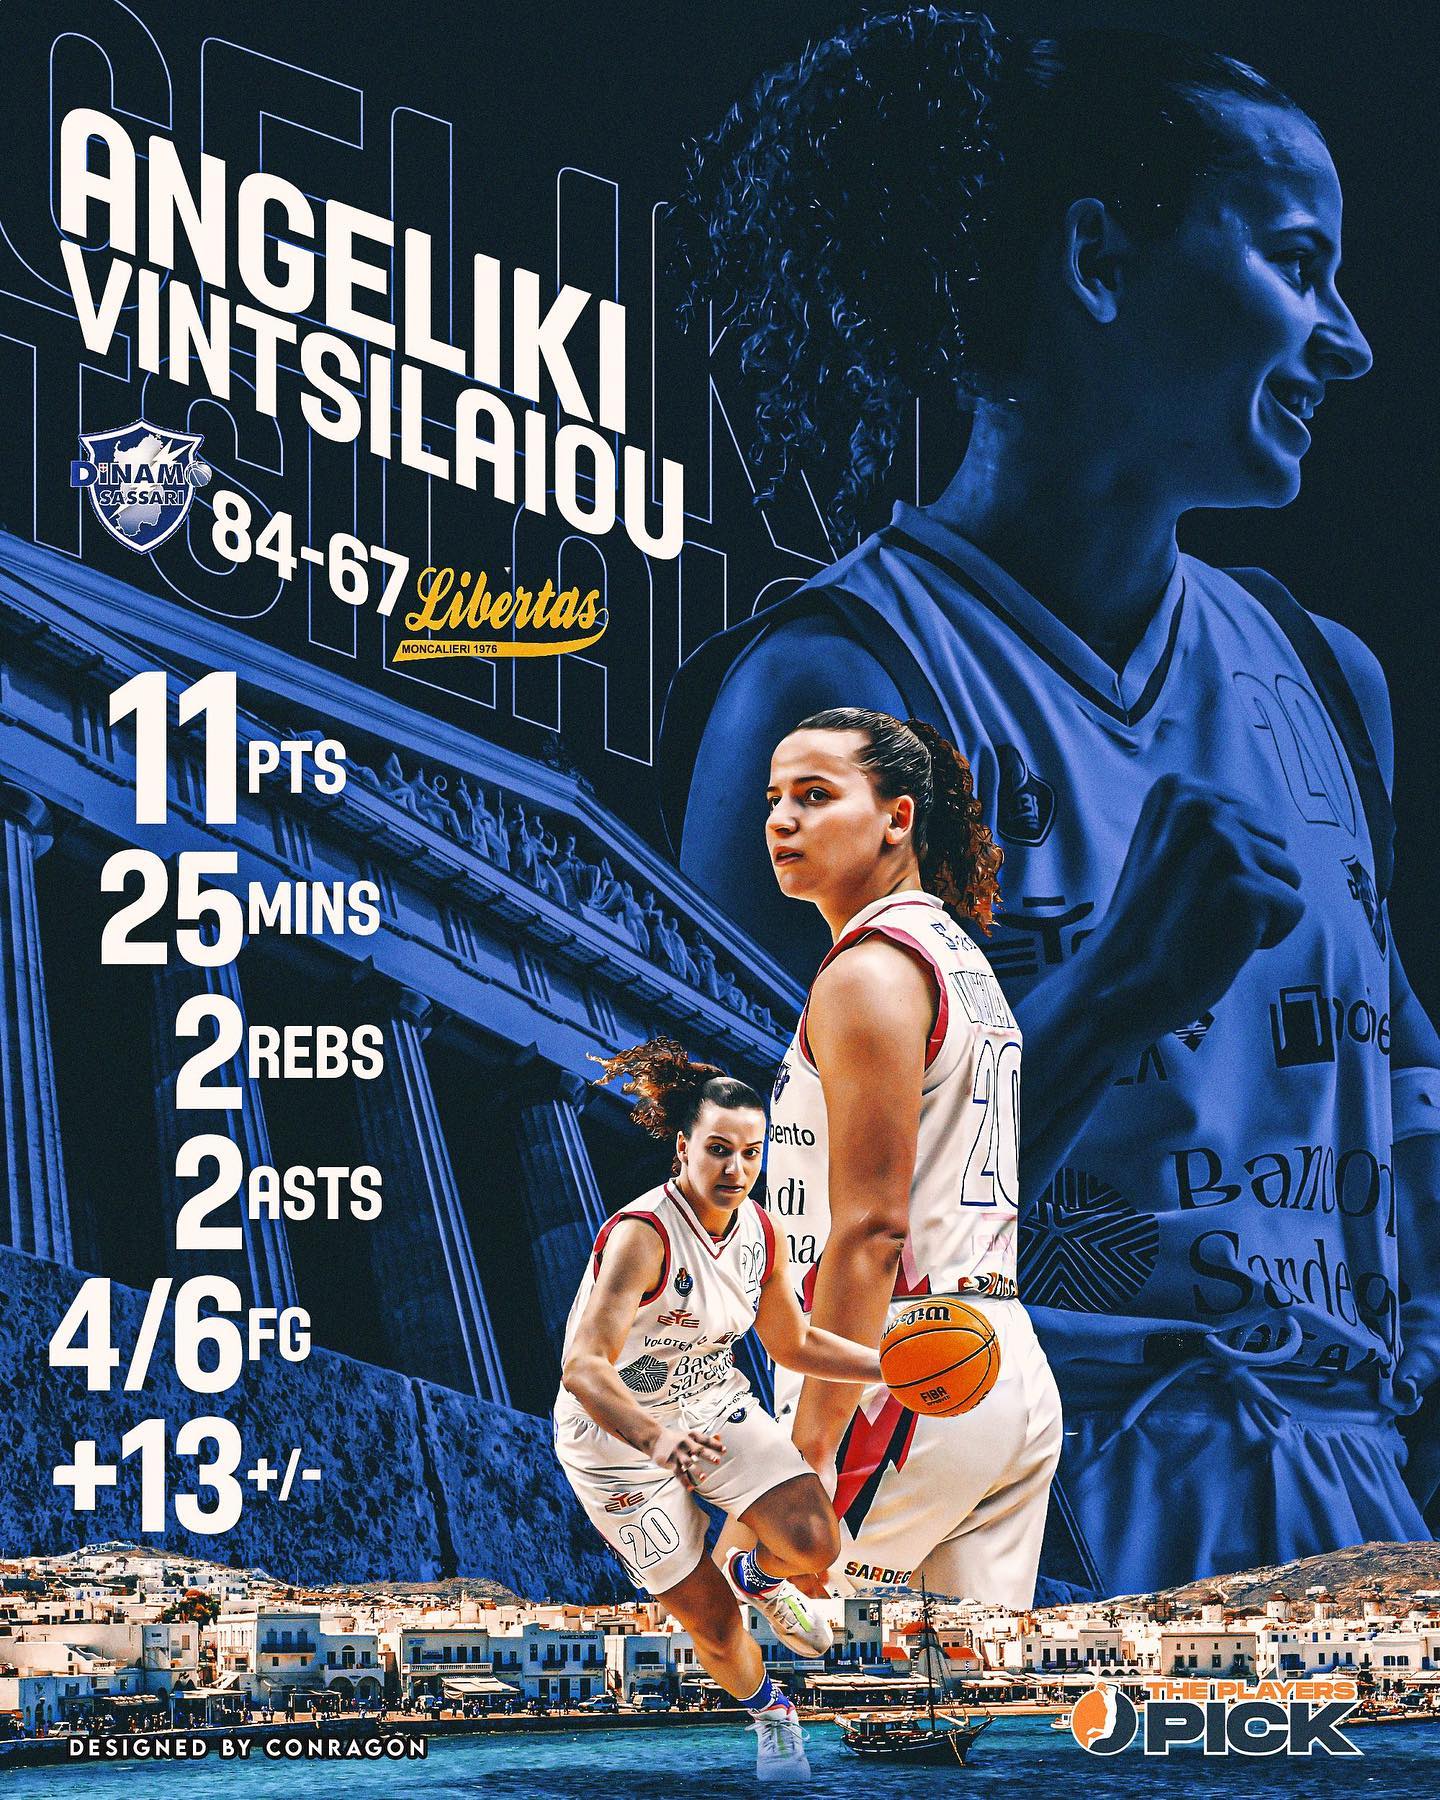 Angeliki Vintsilaiou was crucial for Dinamo Sassari in Play-out Game 1!